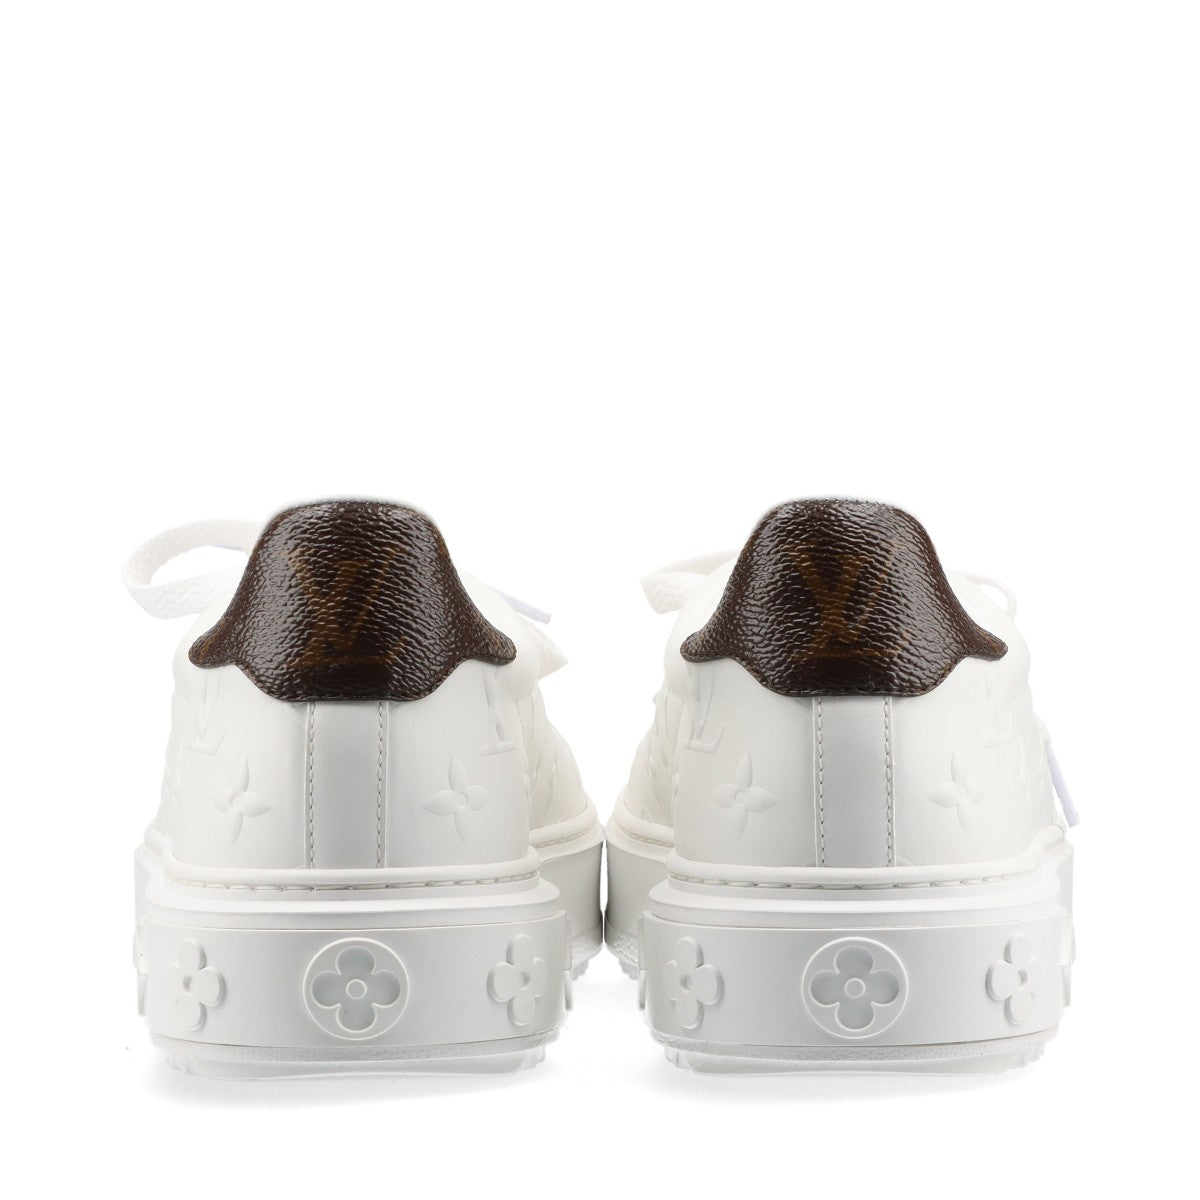 Louis Vuitton Timeout line 22 years PVC & leather Sneakers 37 Ladies' White x brown DD0232 Monogram There is a storage bag